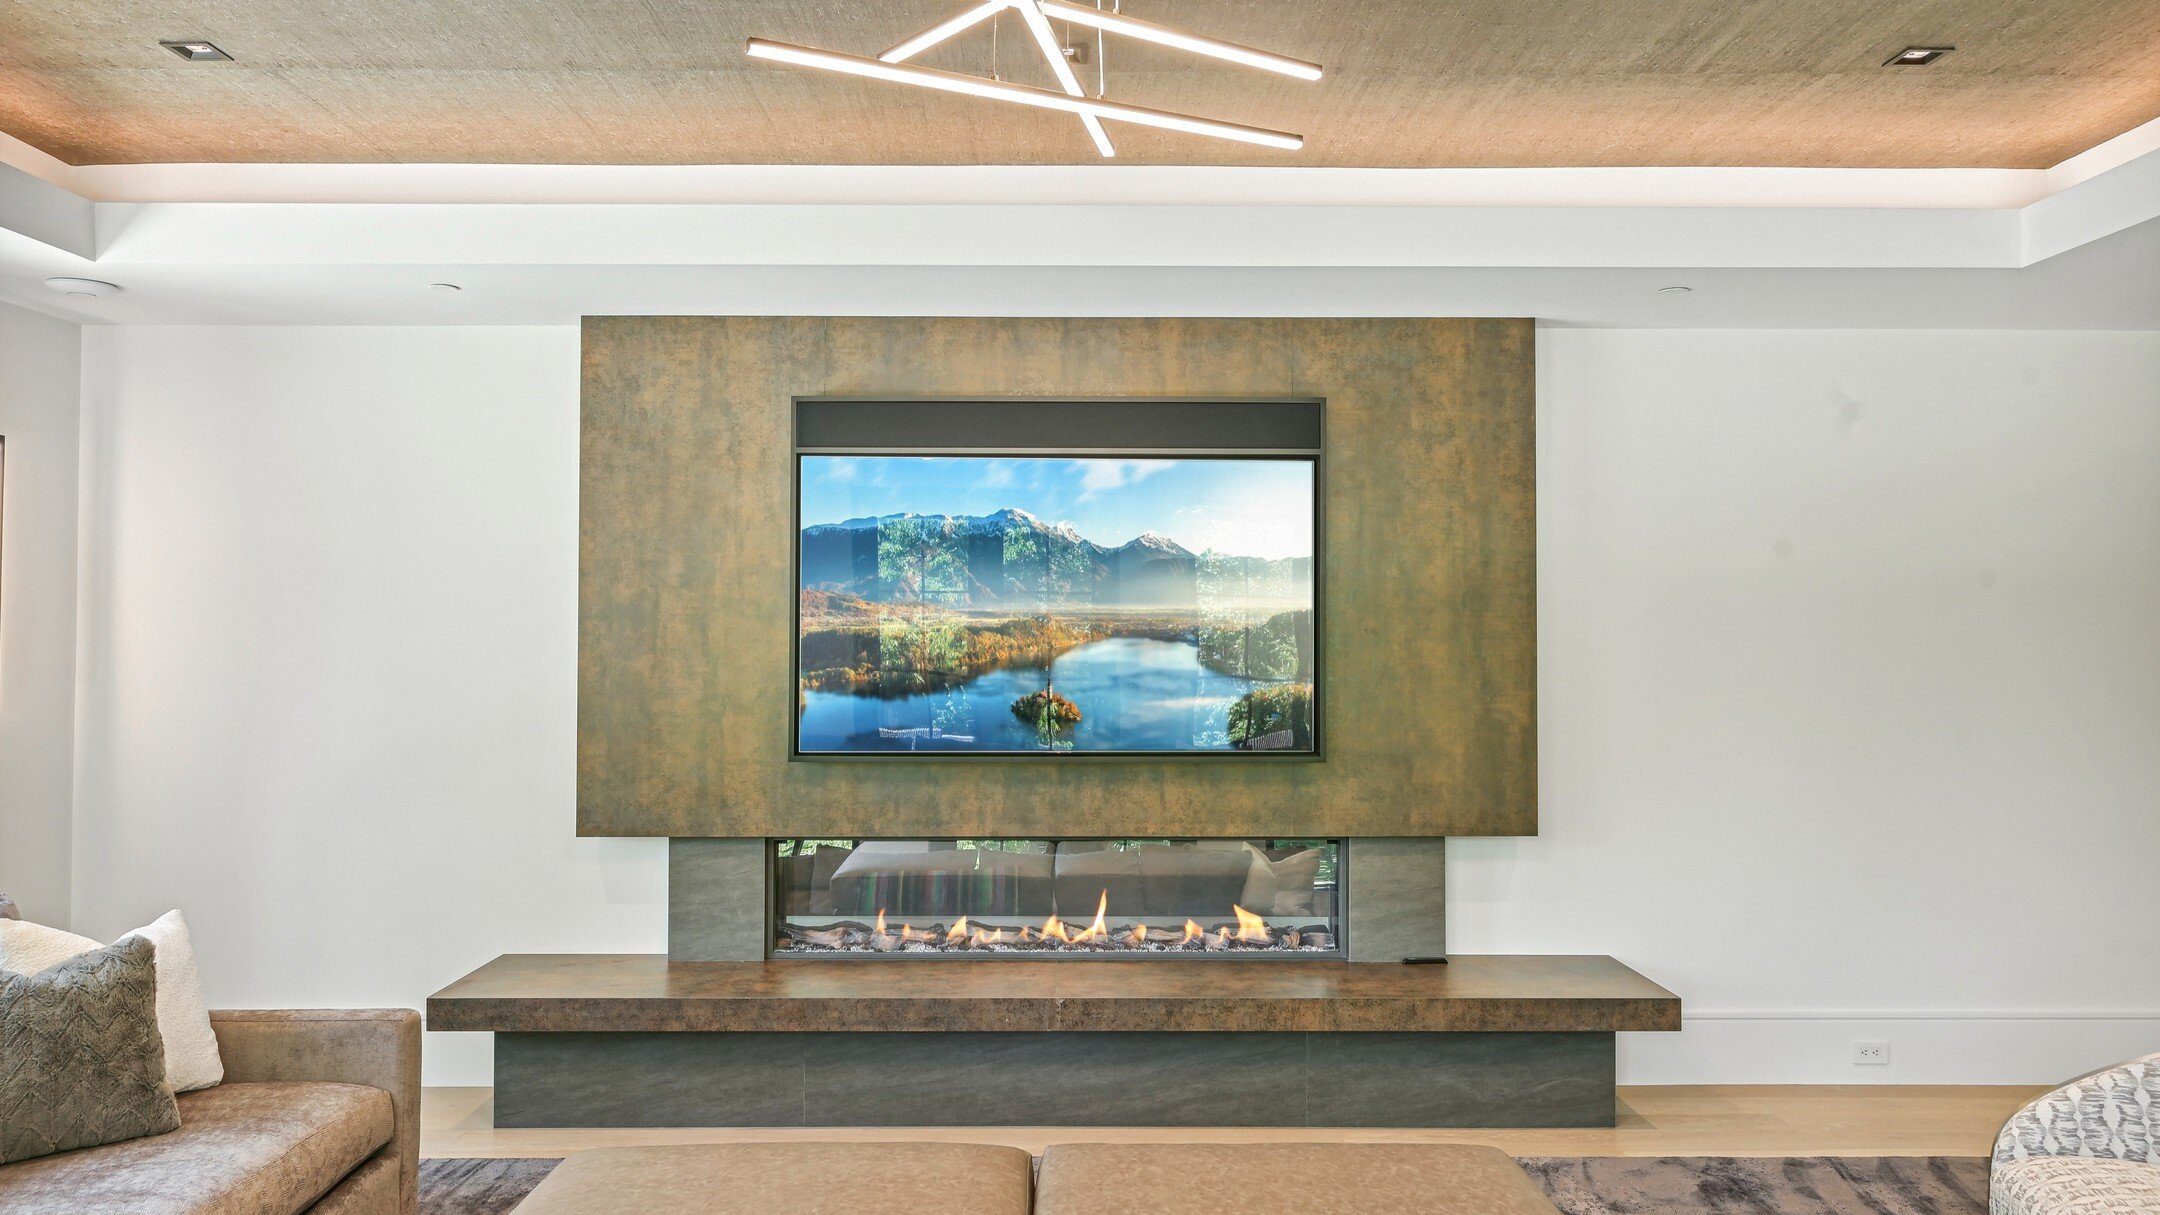 If you're looking for the perfect place to watch the super bowl playoffs, we think we may have found it. 

This family rec space has everything! 

#customintegrator #smarthome #smarthomeliving #design #technology #luxuryhomes #custombuilder #resident